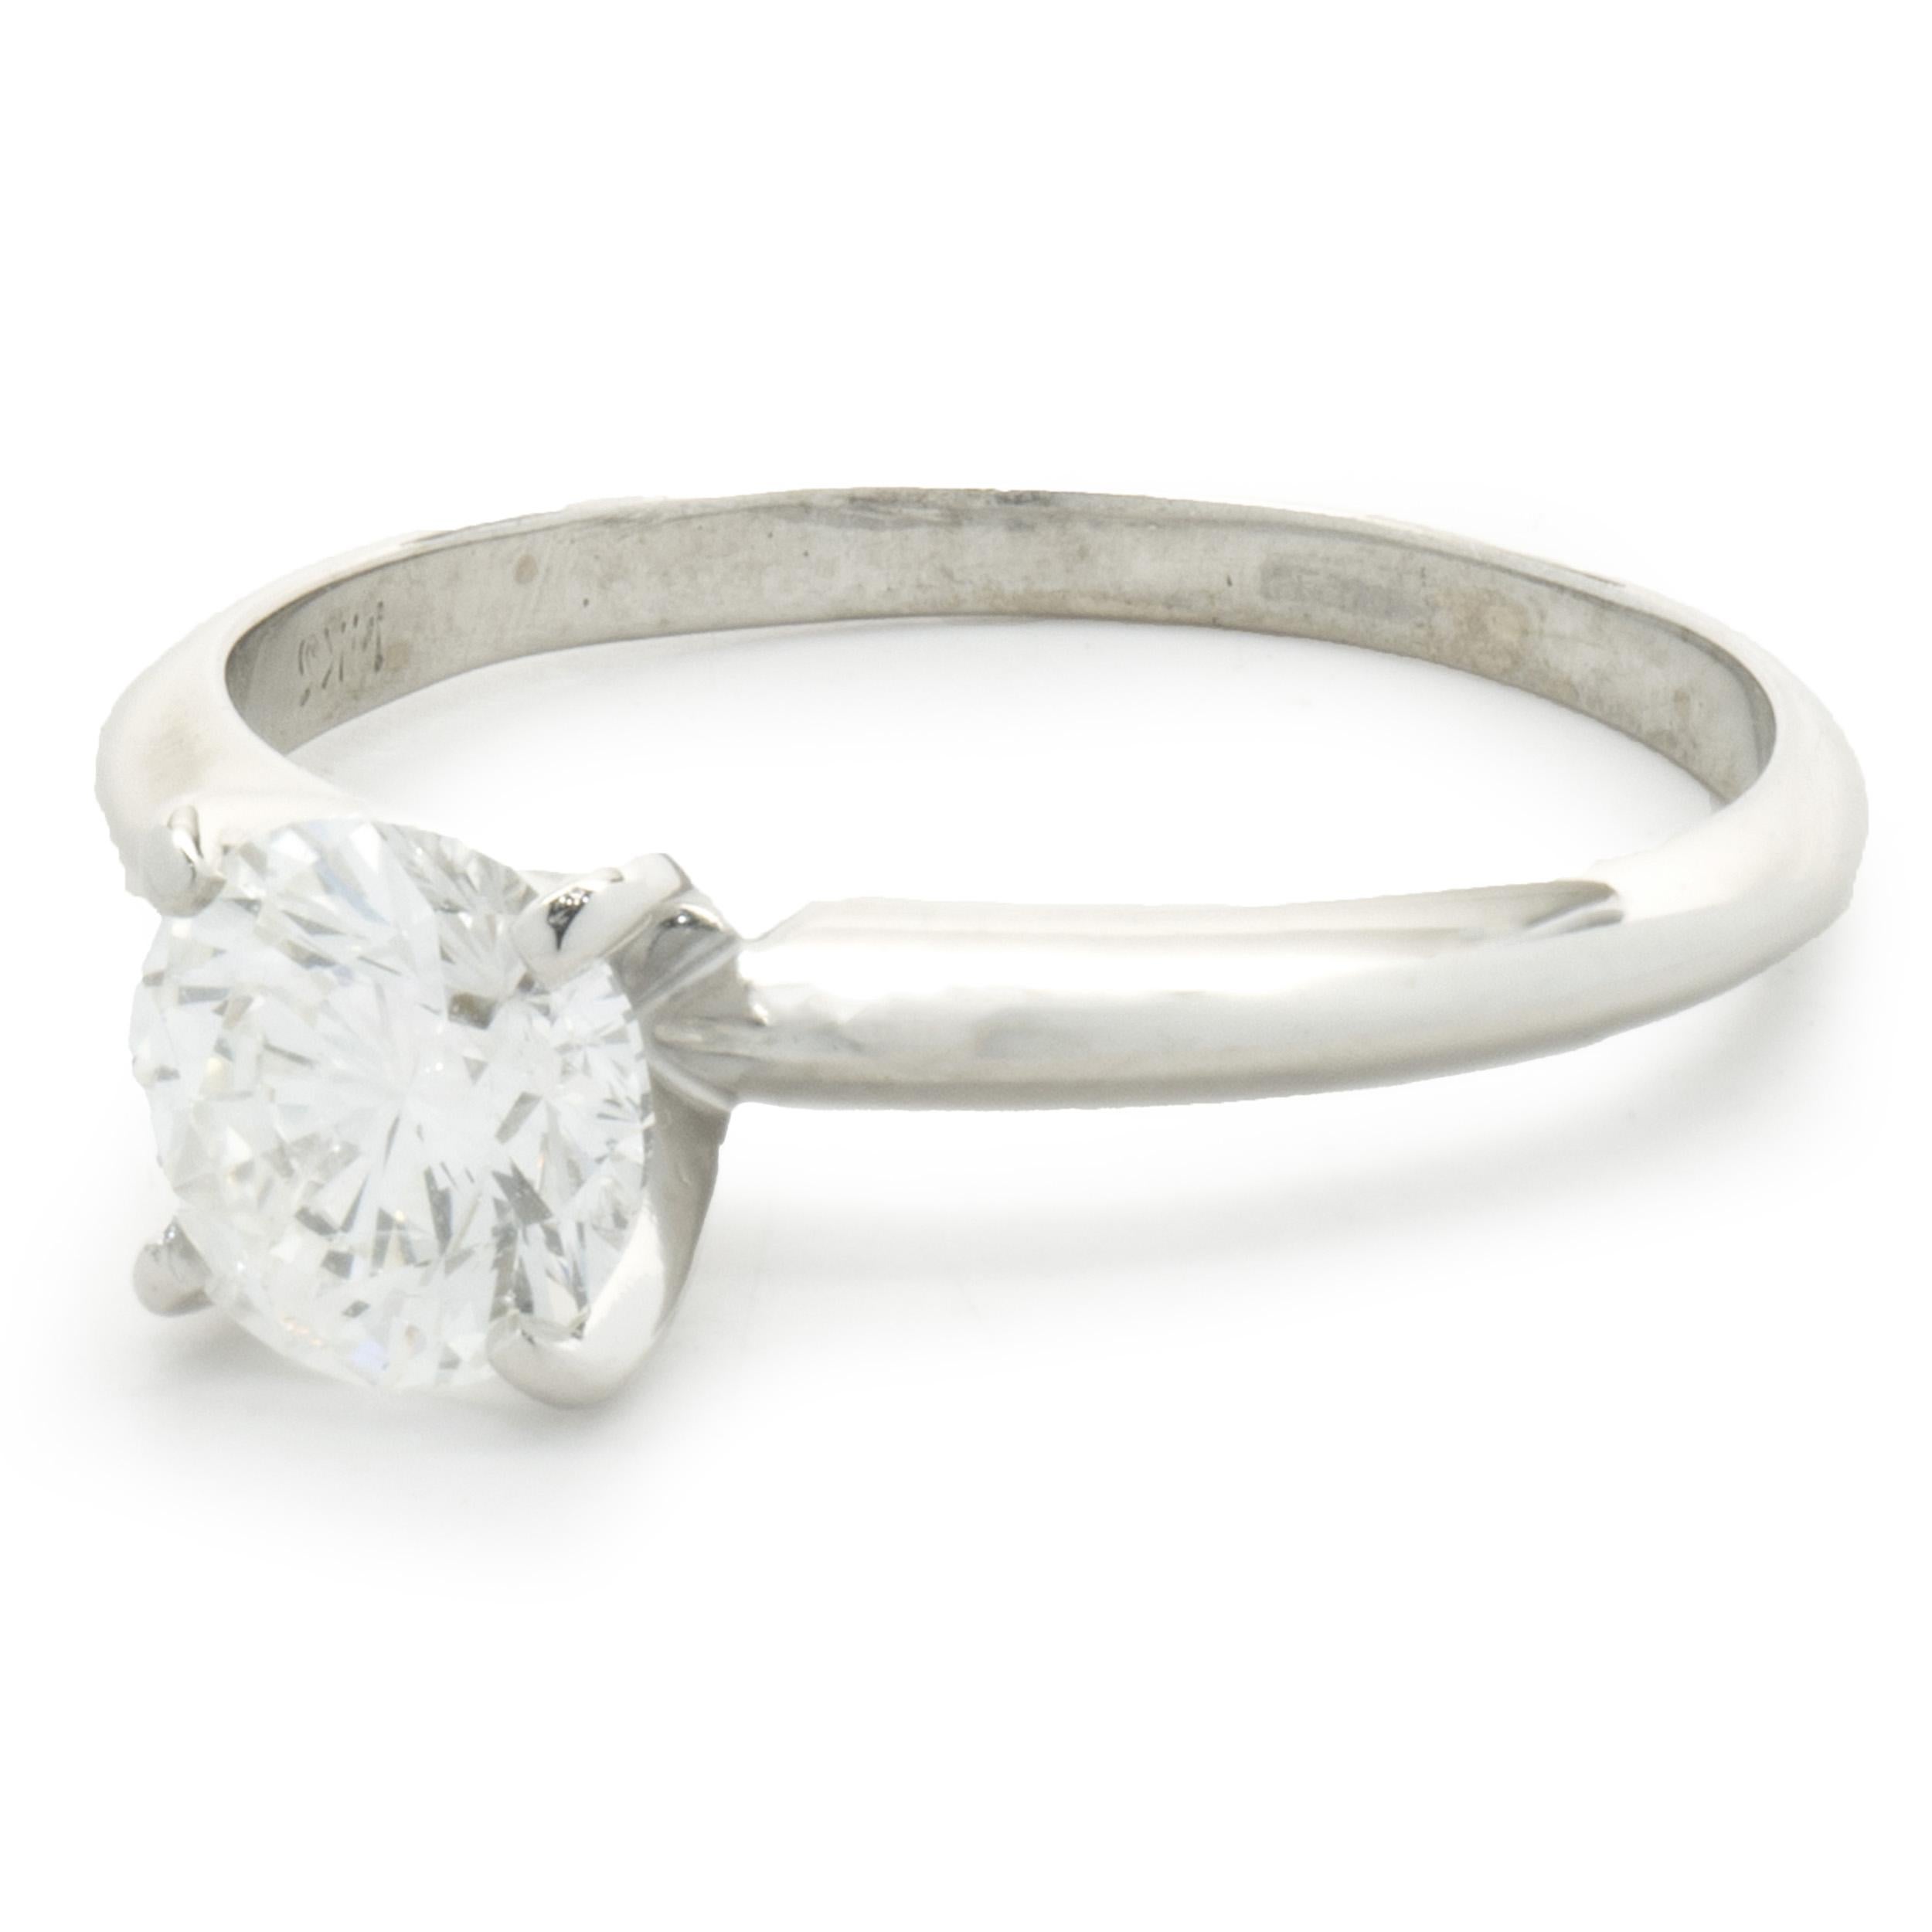 Designer: Custom
Material: 14K white gold
Diamonds: 1 round brilliant cut = 0.95ct
Color: G
Clarity: SI2
Dimensions: ring top measures 2.3mm wide
Ring Size: 7.75 (complimentary sizing available)
Weight: 2.37 grams